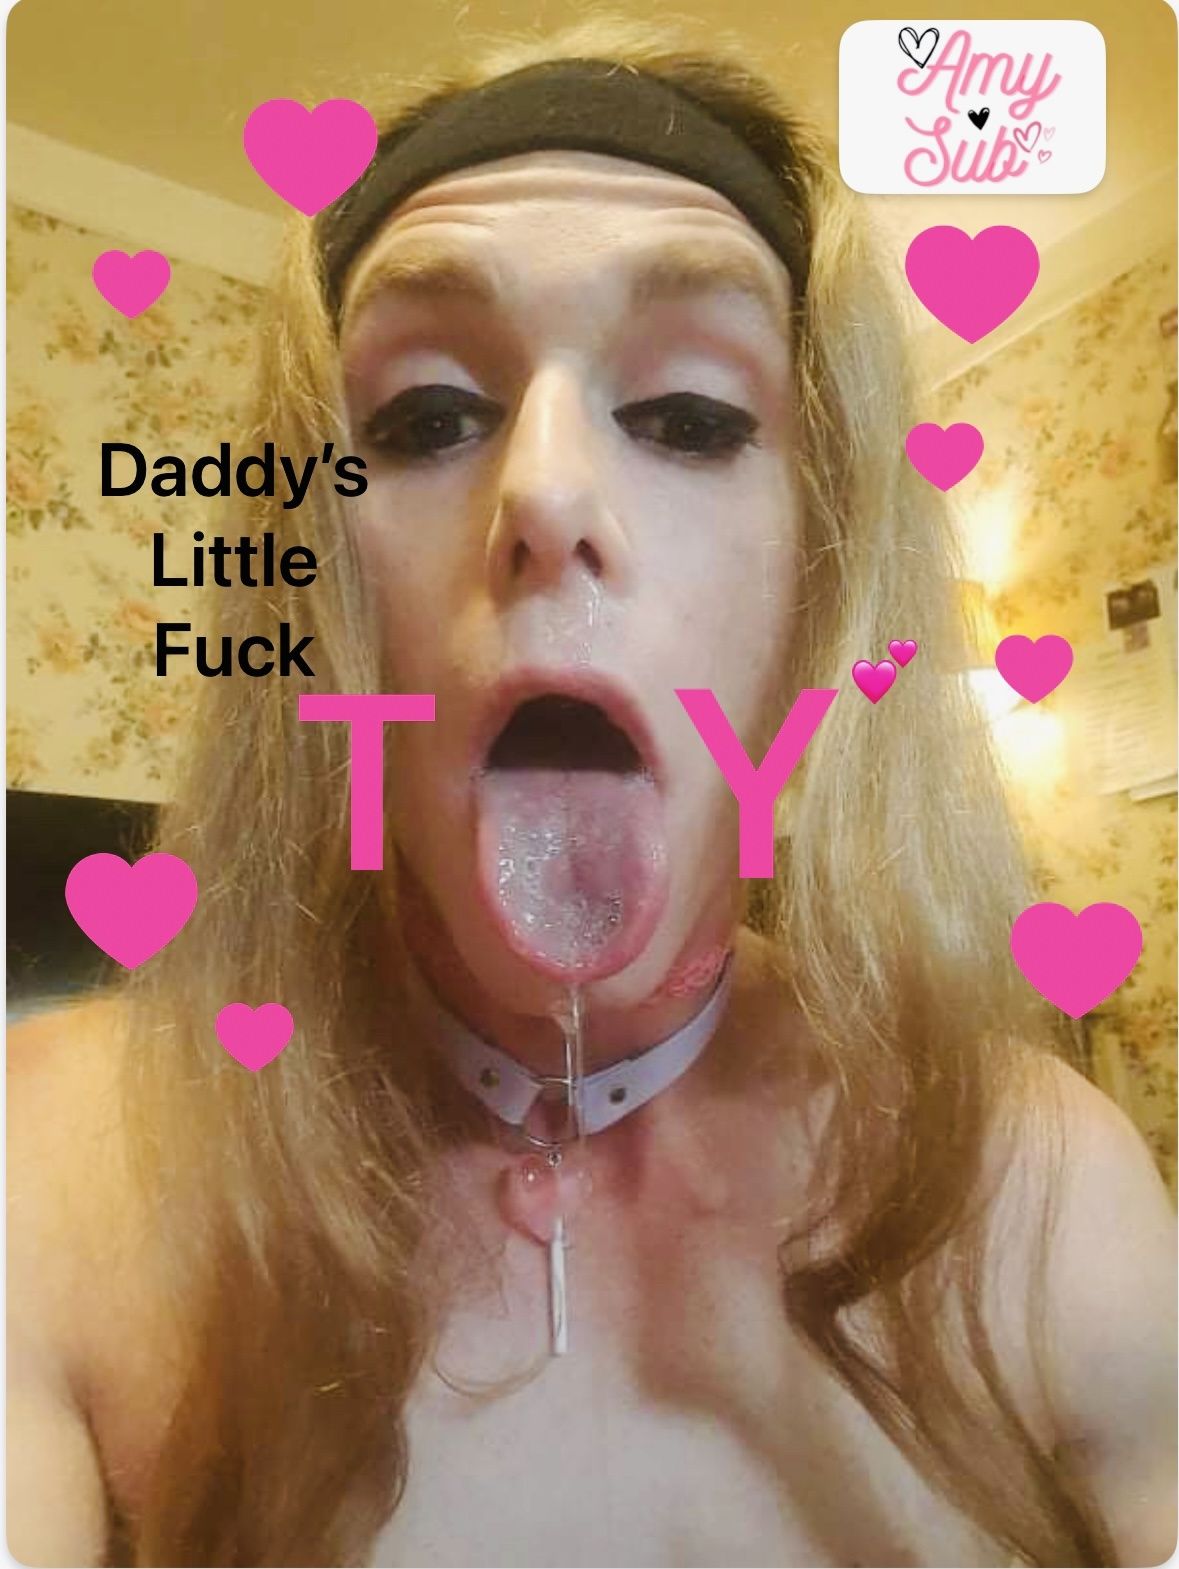 Daddy’s toy